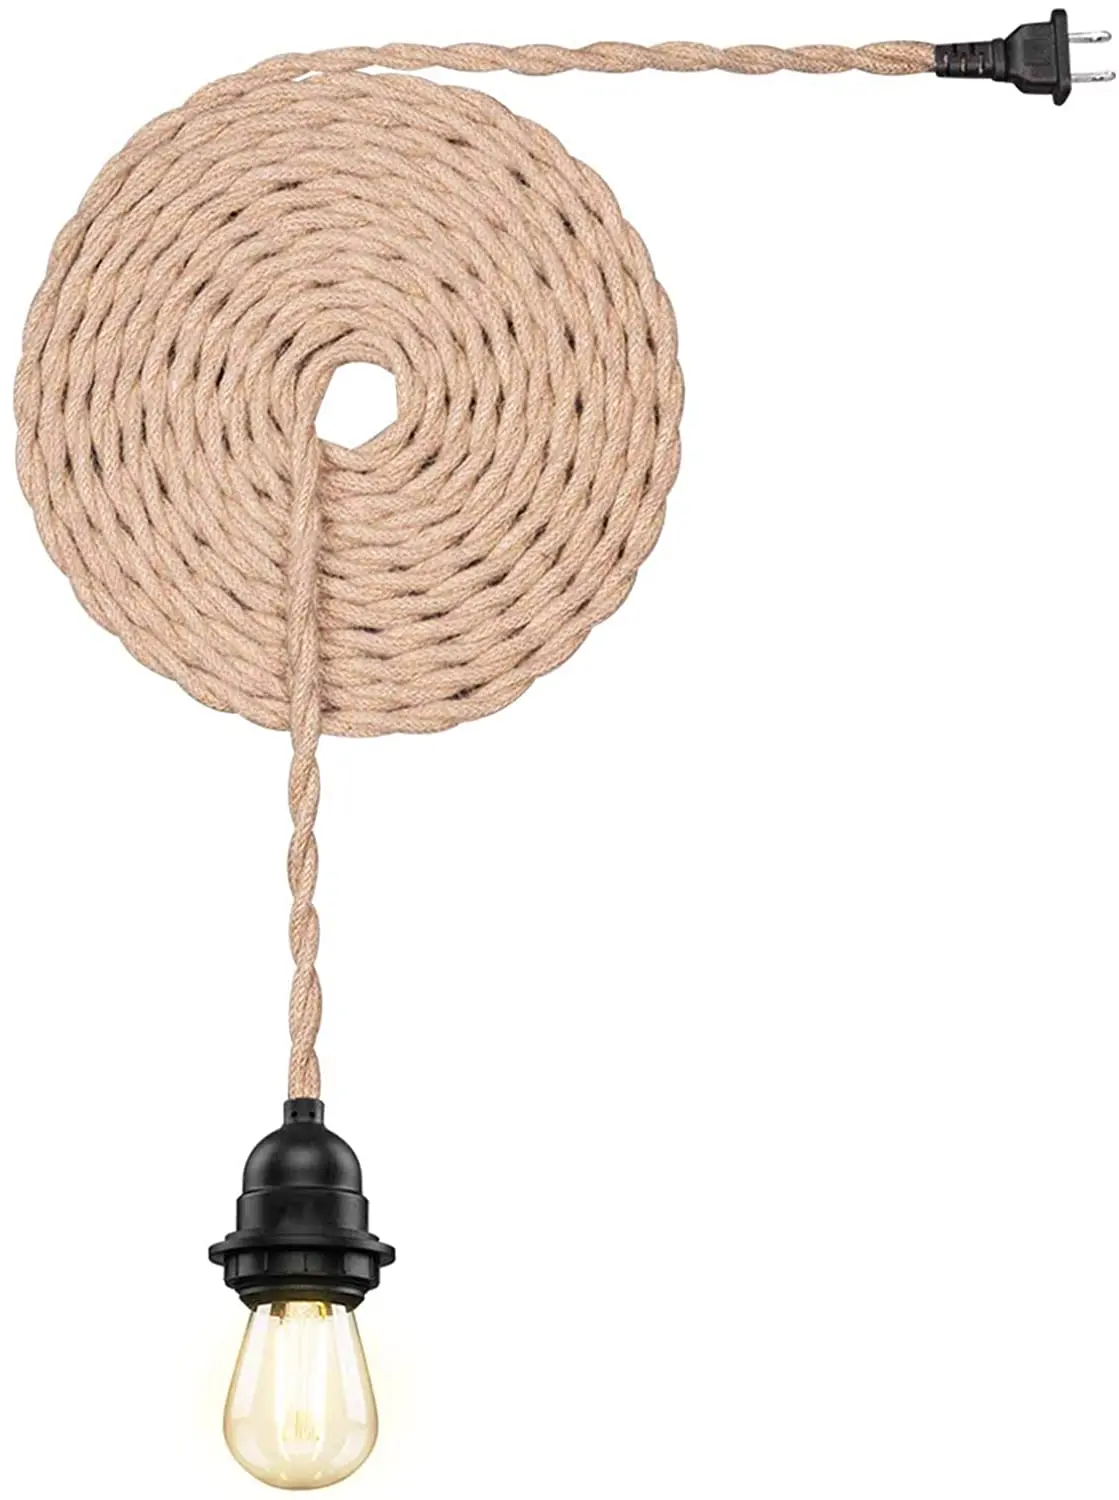 Vintage Waterproof Ceiling Pendant Light Kit with Twisted Hemp Rope Hanging Lighting Cord Fixture 16.6 FT E26 Outdoor Fireproof Chandelier for Industrial DIY Projects Bedroom Bar Backyard Balcony UL